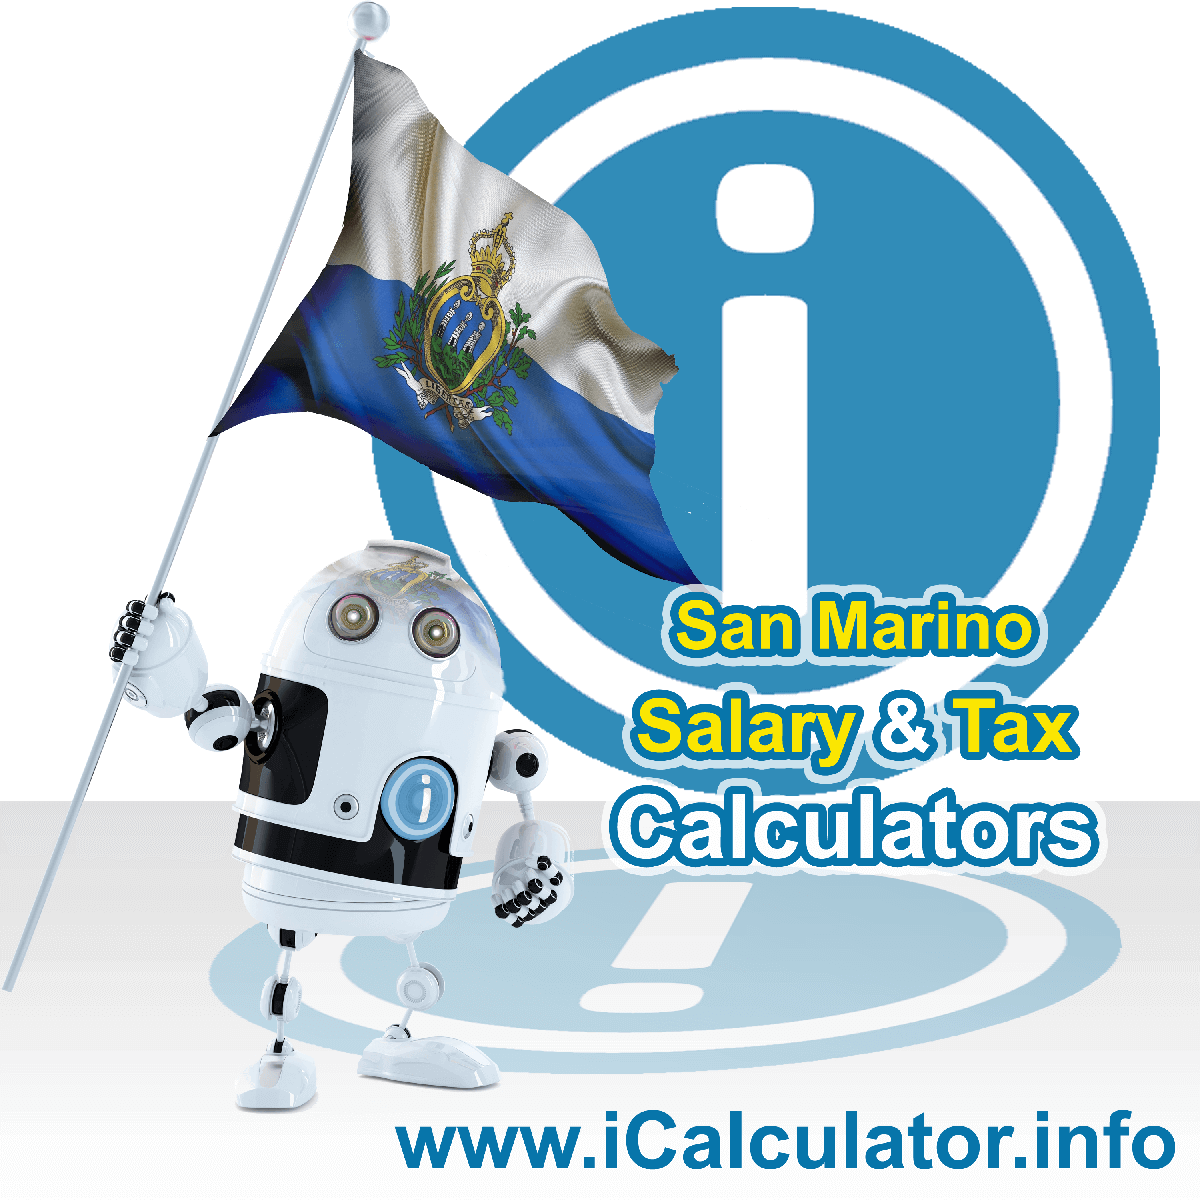 San Marino Wage Calculator. This image shows the San Marino flag and information relating to the tax formula for the San Marino Tax Calculator